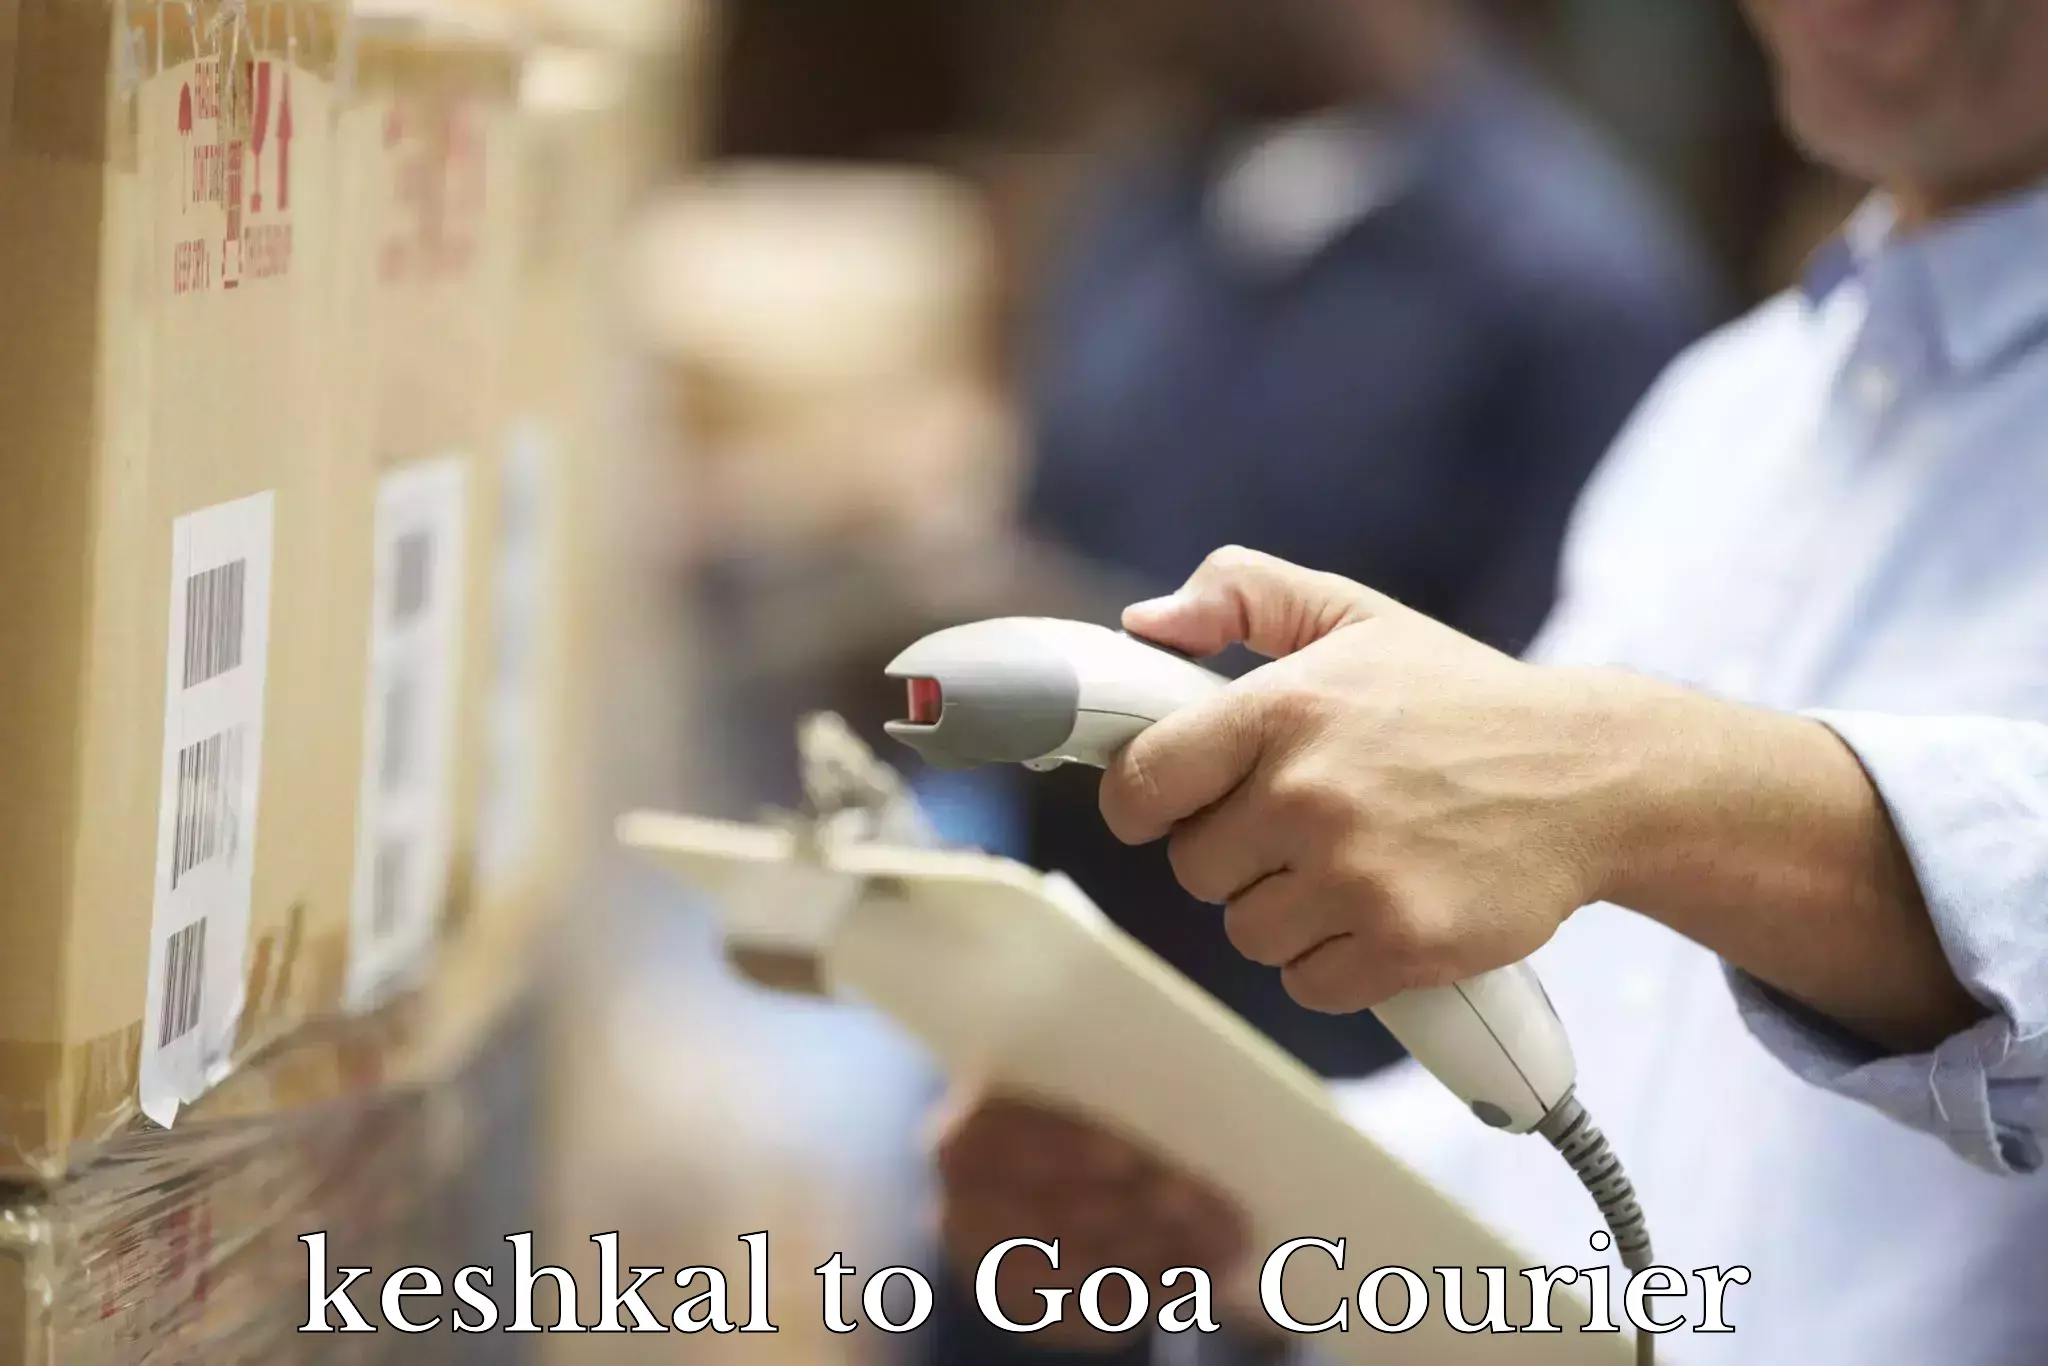 Subscription-based courier keshkal to Panjim